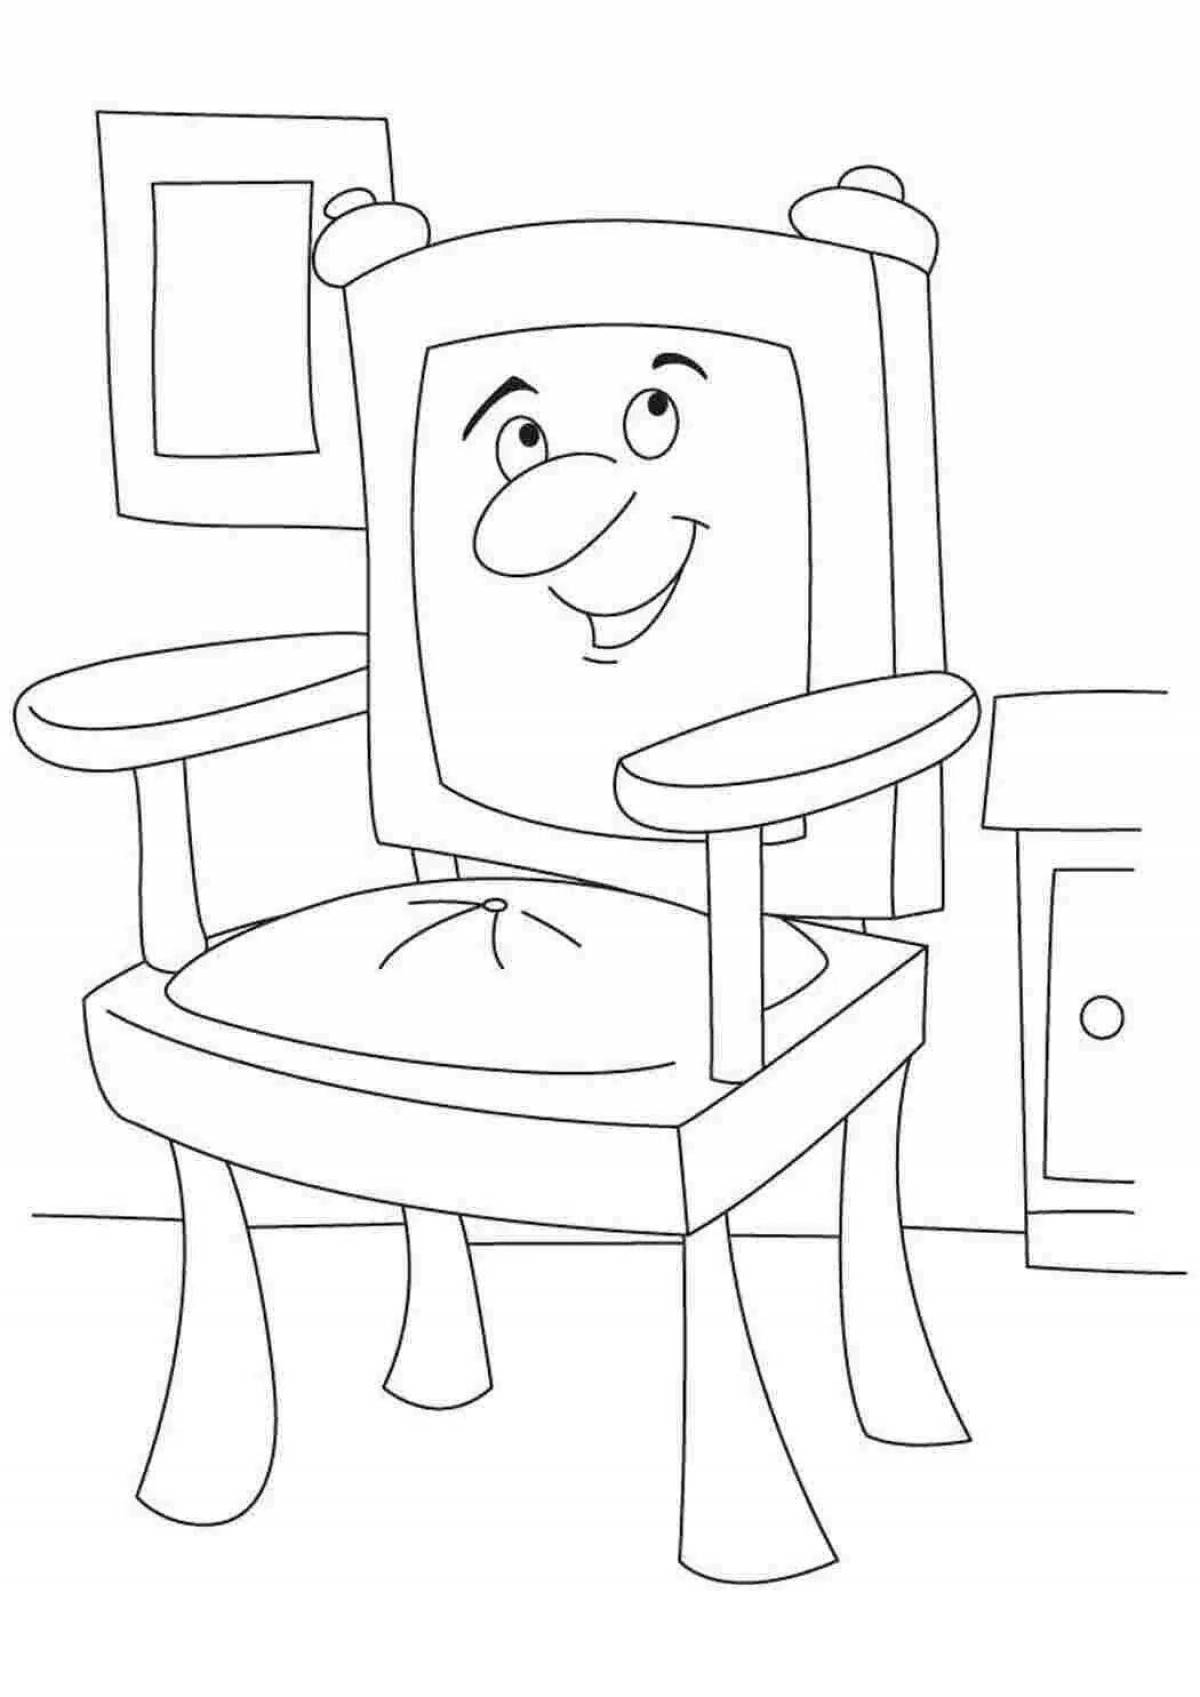 Coloring book shimmering high chair